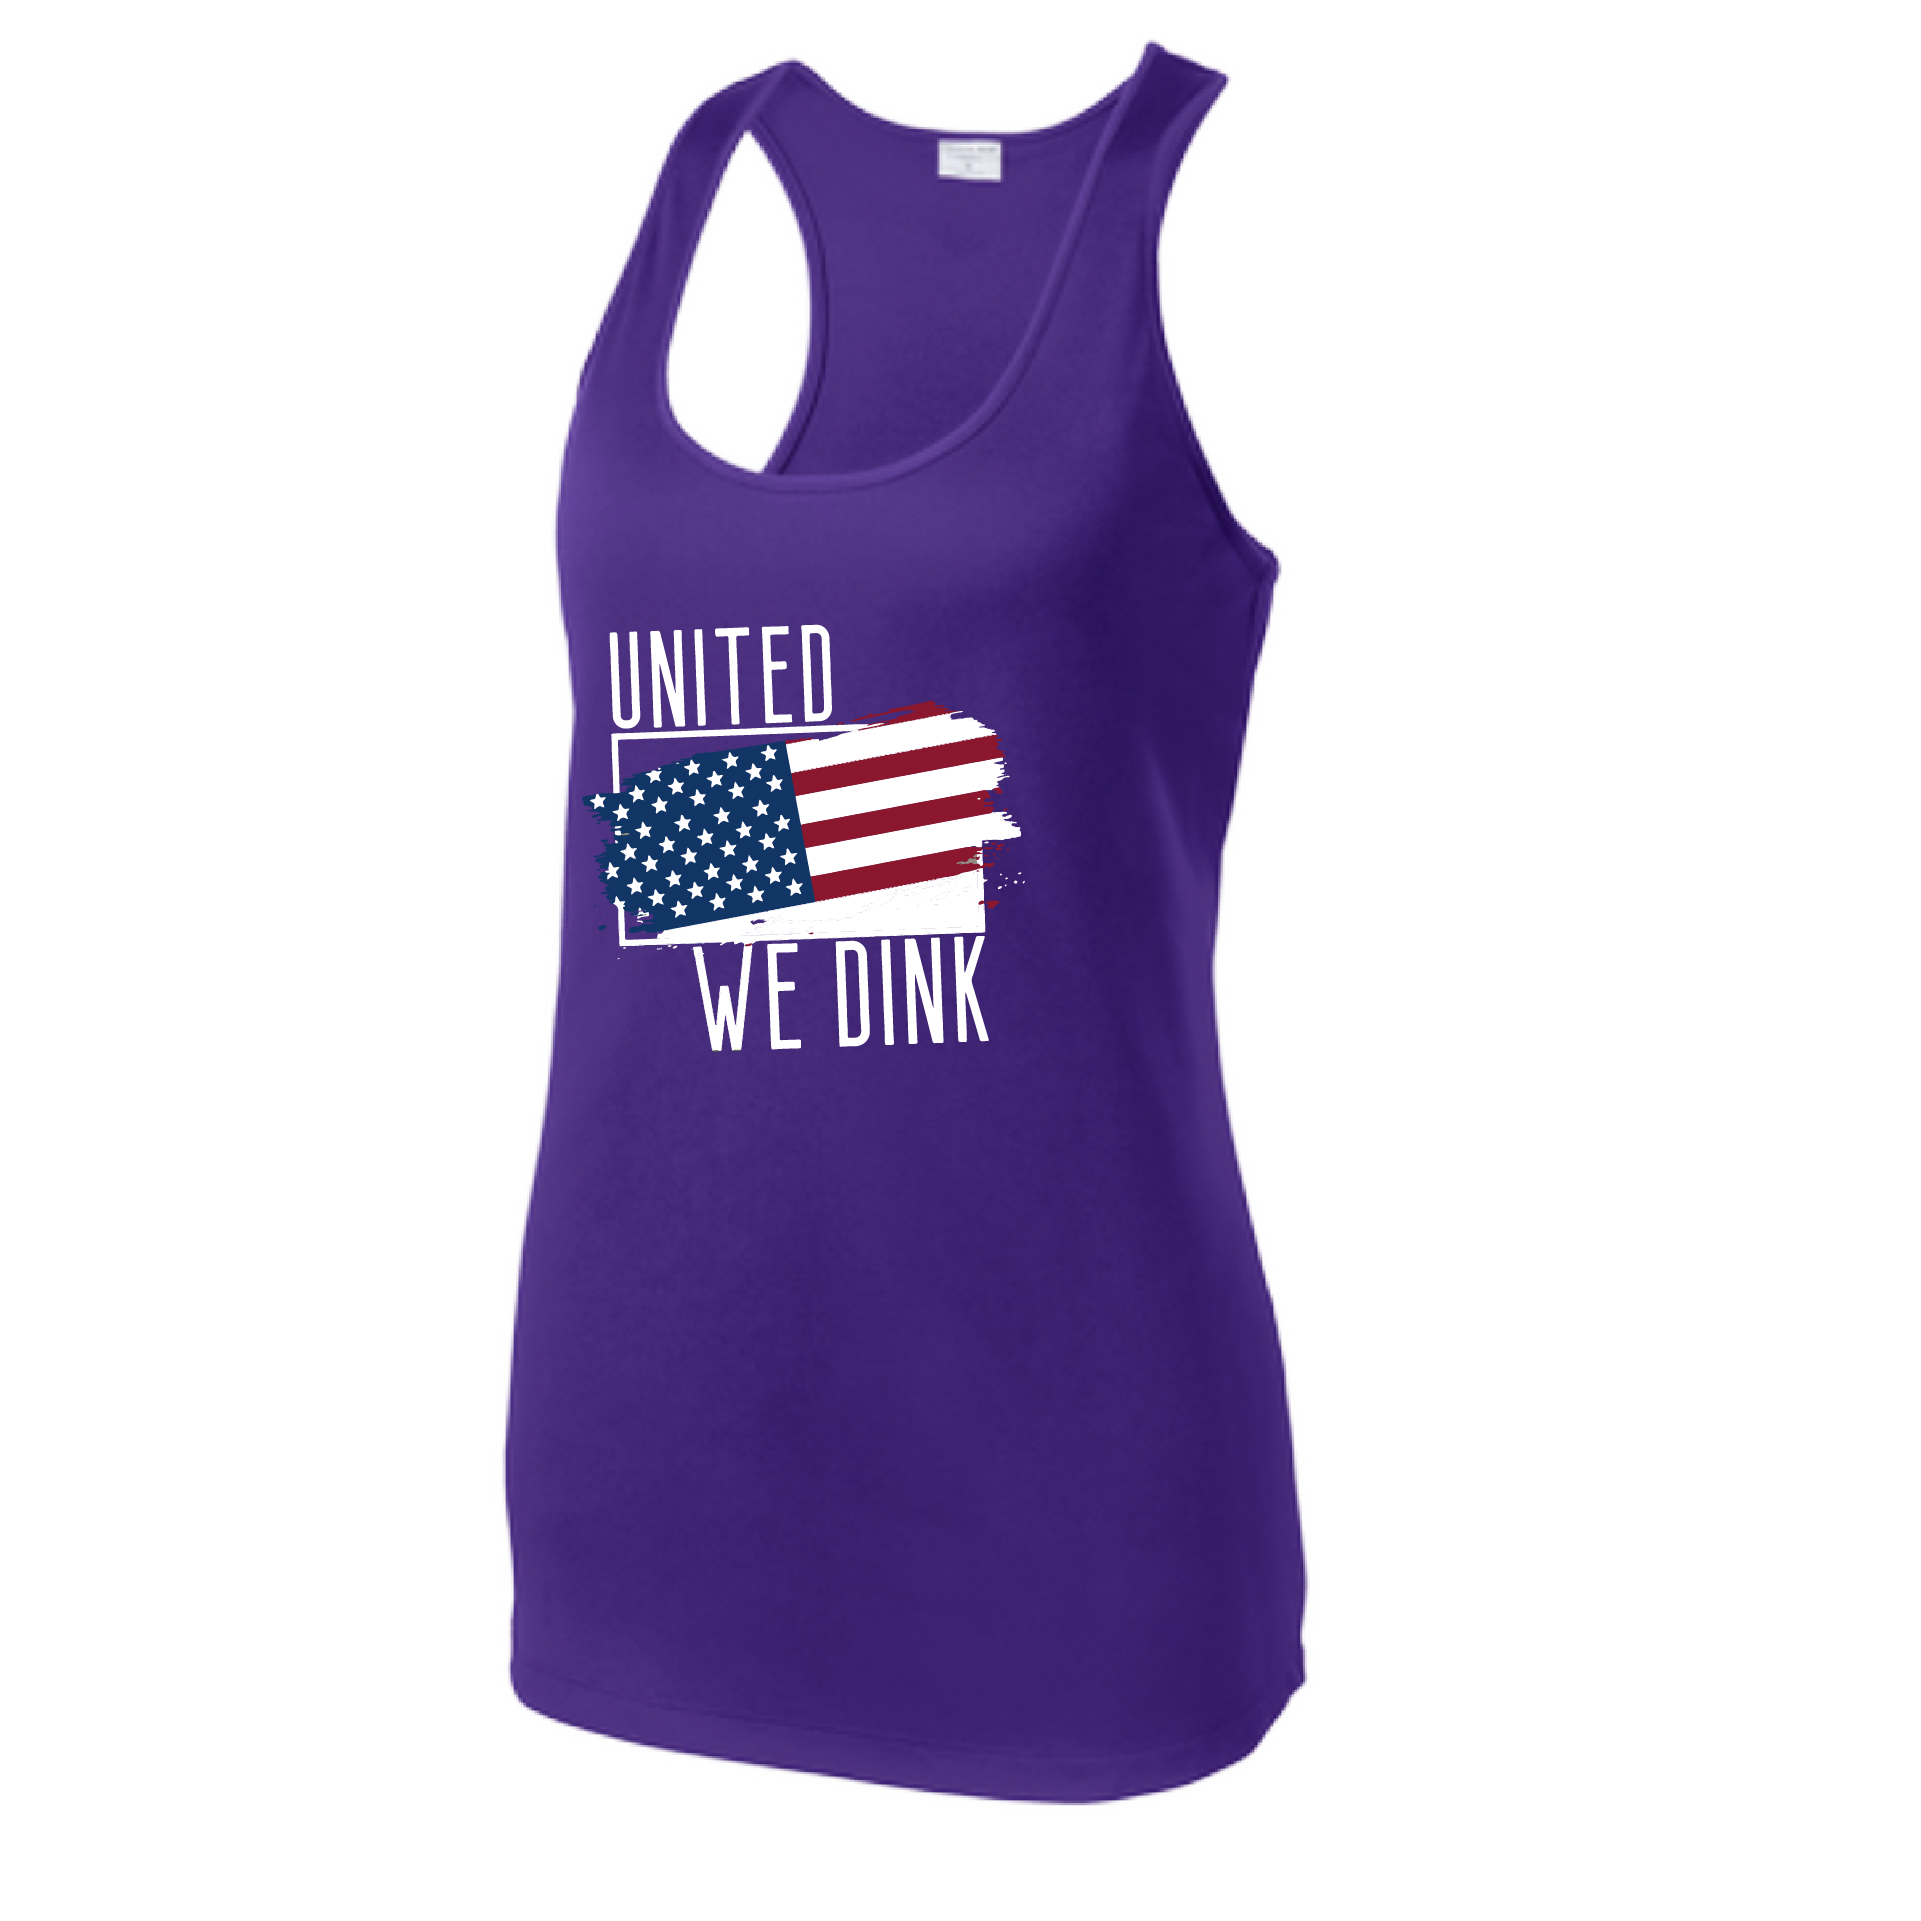 Pickleball Design: United We Dink  Women's Styles: Racerback Tank  Turn up the volume in this Women's shirt with its perfect mix of softness and attitude. Material is ultra-comfortable with moisture wicking properties and tri-blend softness. PosiCharge technology locks in color. Highly breathable and lightweight.